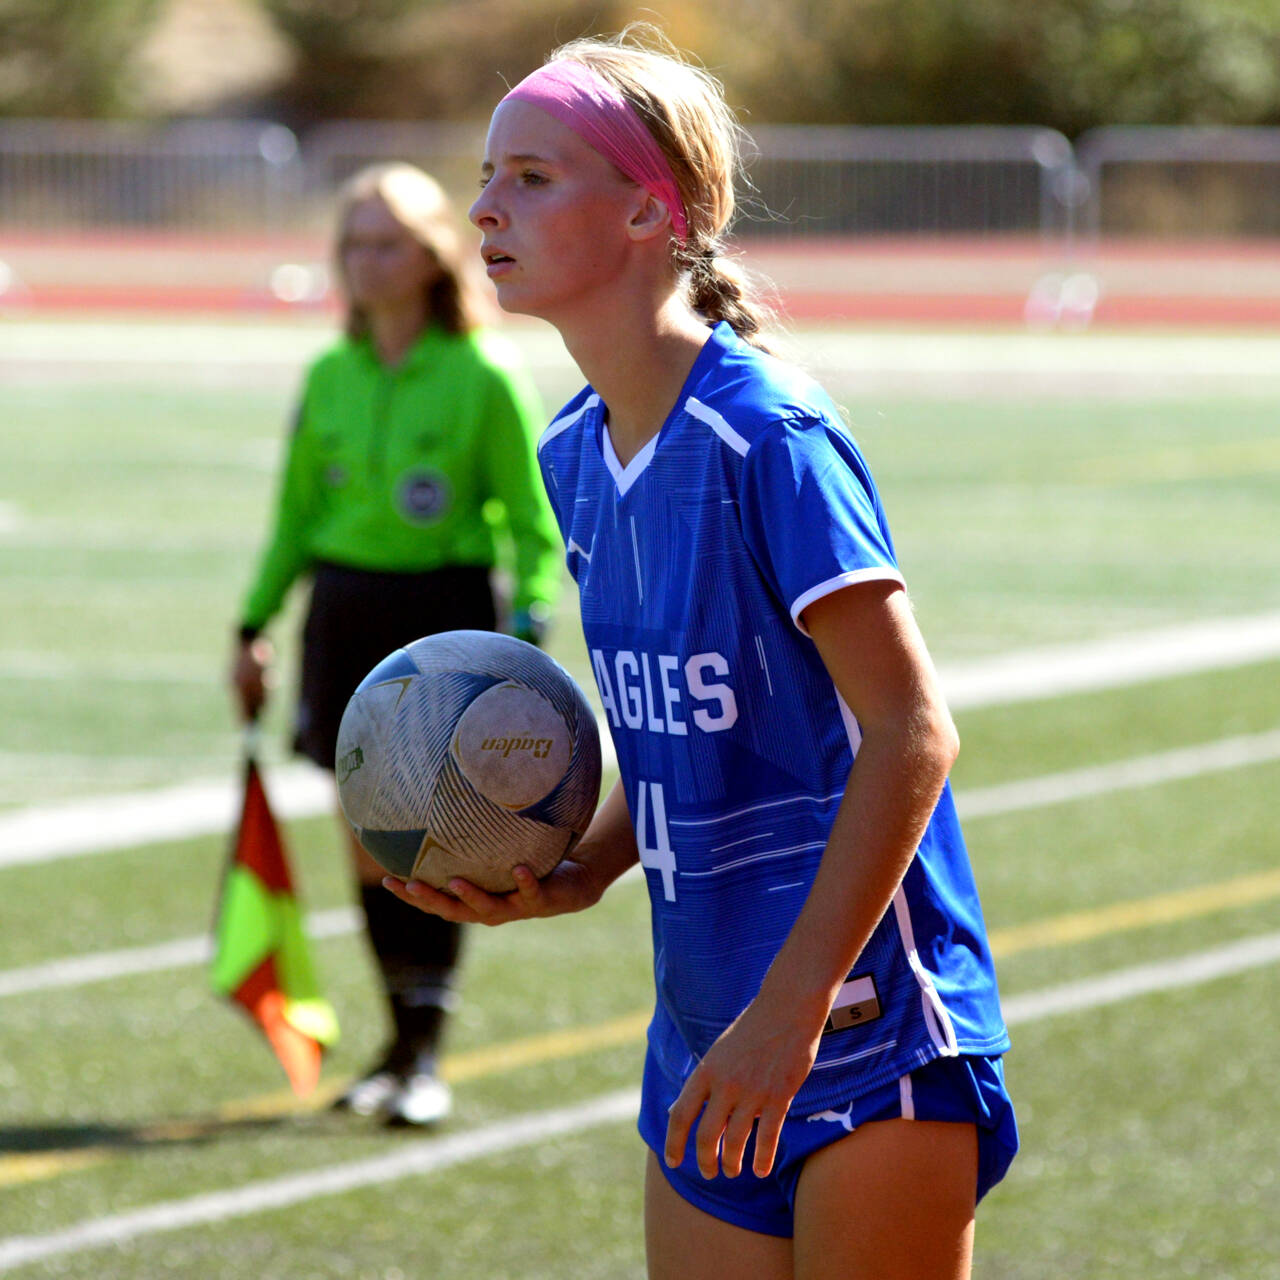 DAILY WORLD FILE PHOTO Elma senior midfielder Aaleigha Weld, seen here in a file photo, scored the game’s only goal in a 1-0 win over Eatonville on Wednesday. Elma secured second place in the 1A Evergreen League with the victory.